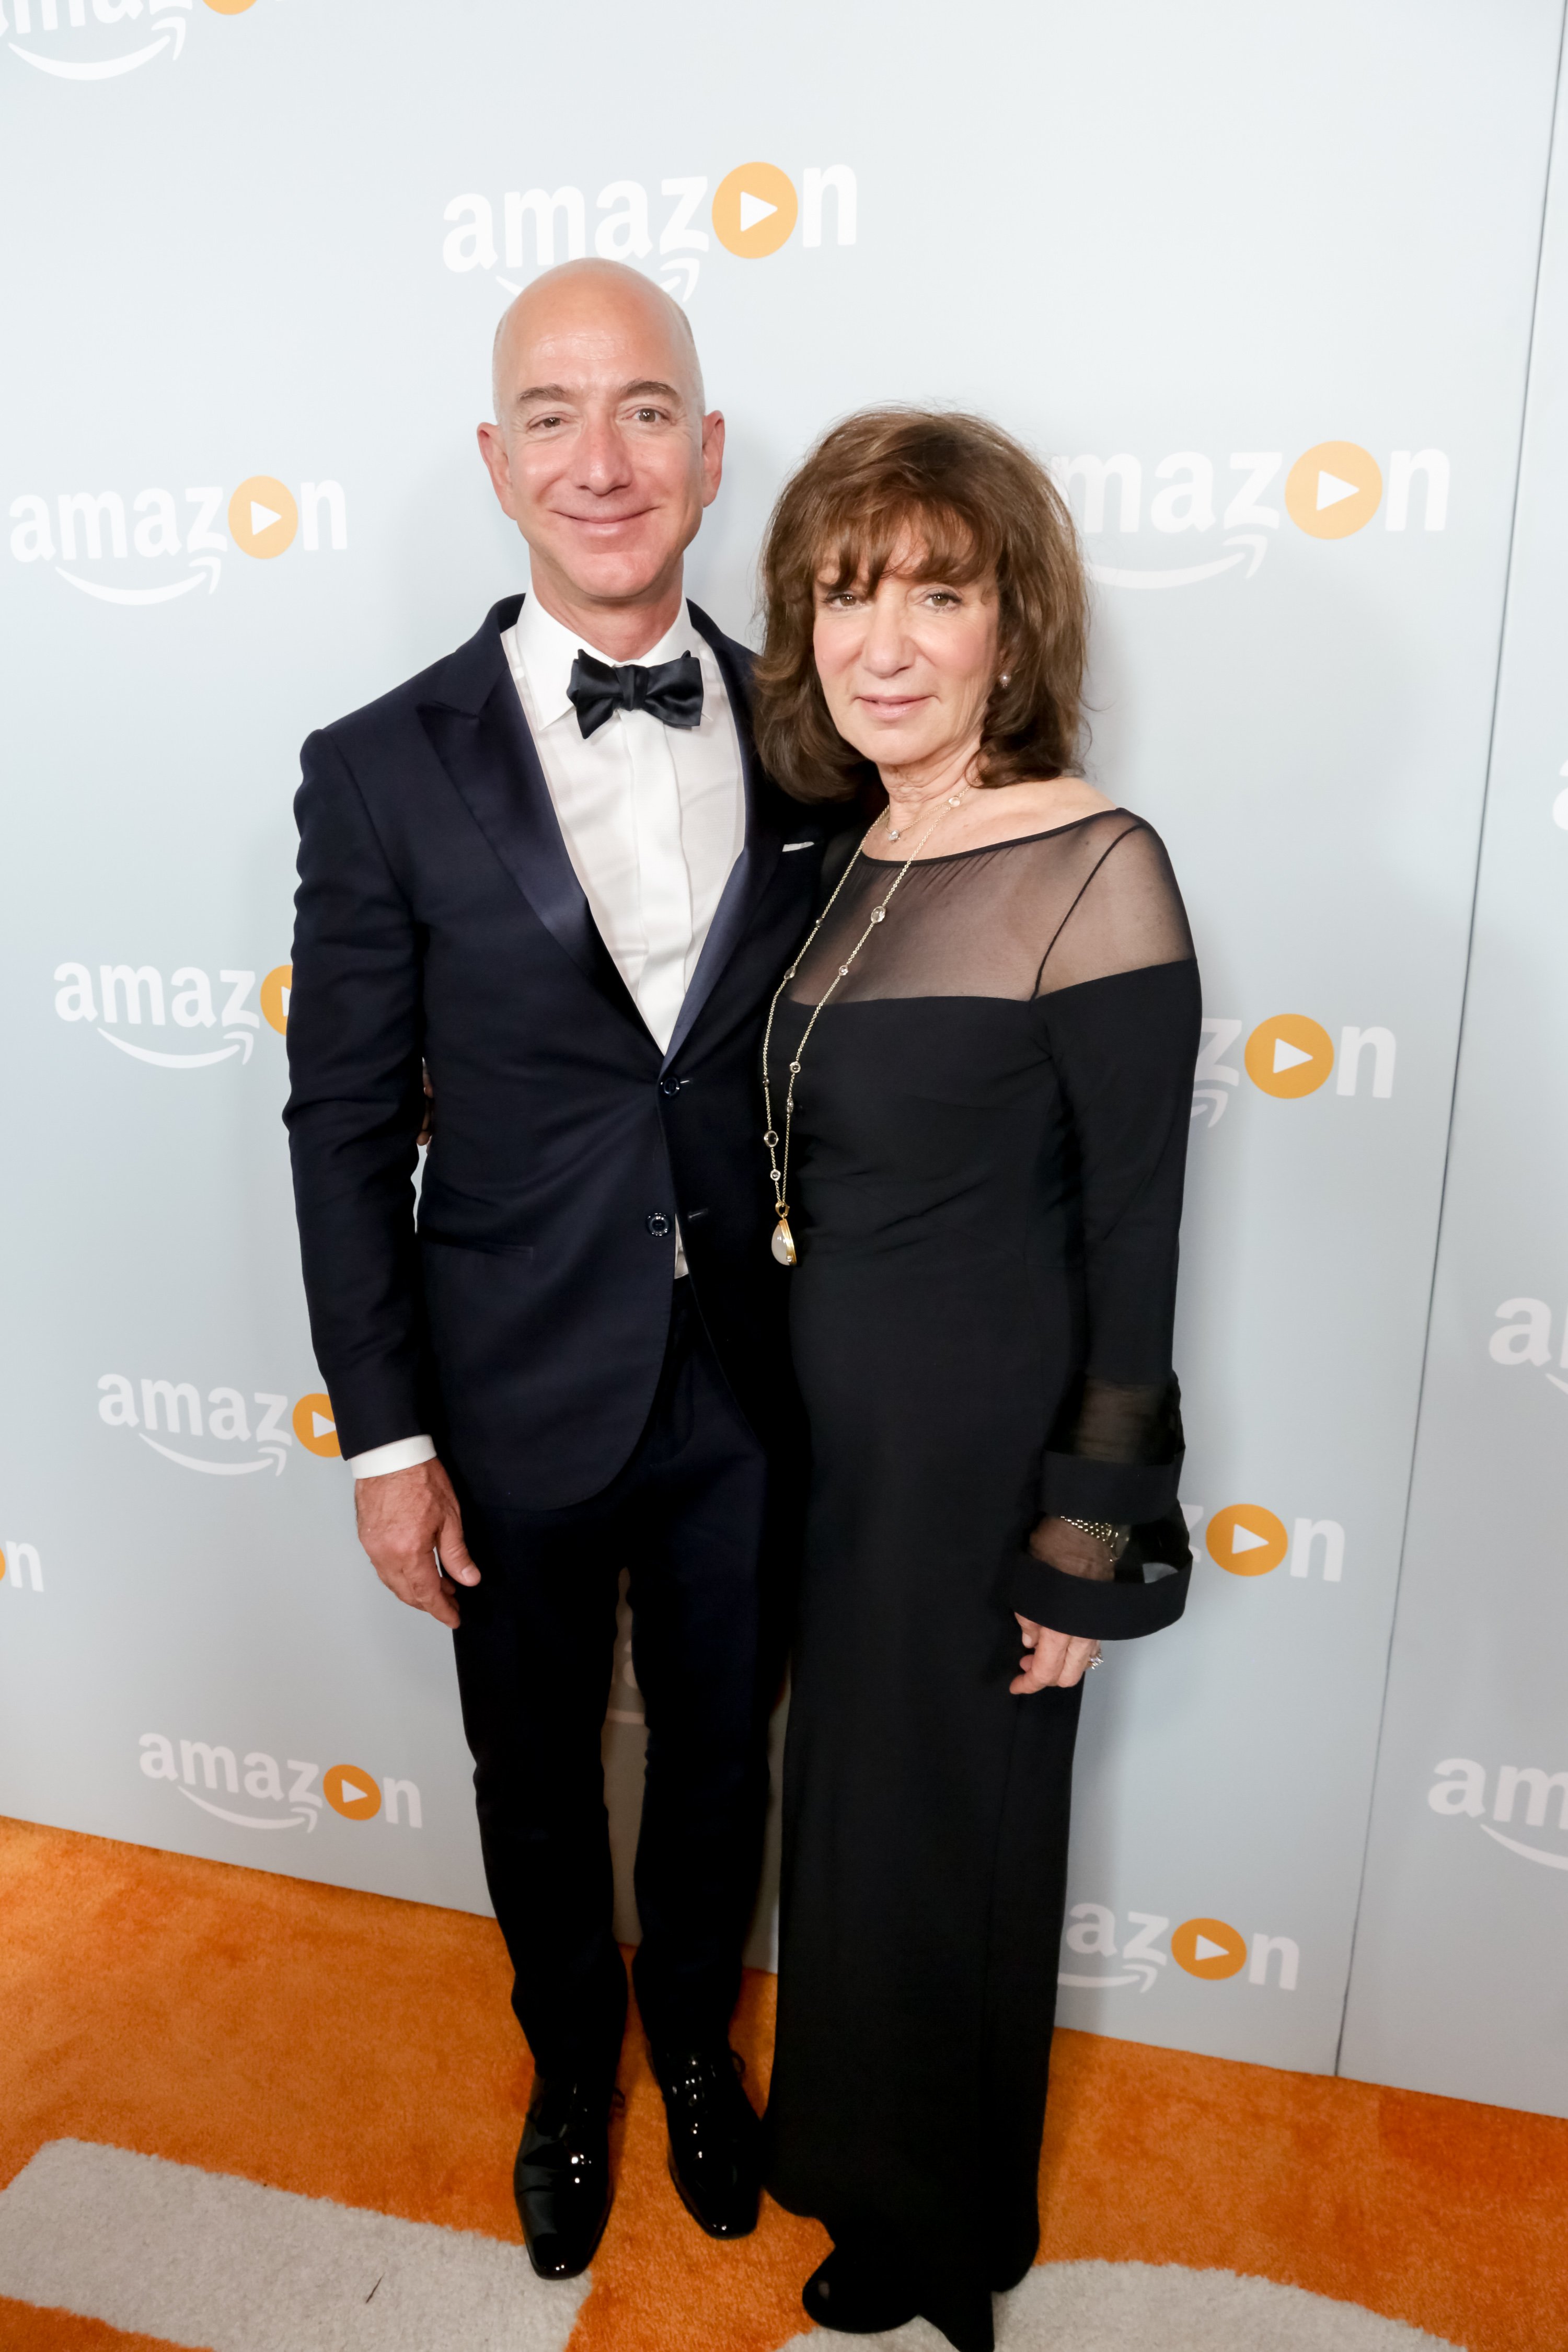 Jeff Bezos and Jacklyn Bezos are photographed as they arrive at Amazon's Emmy Celebration at the Sunset Tower Hotel on September 18, 2016, in West Hollywood | Source: Getty Images